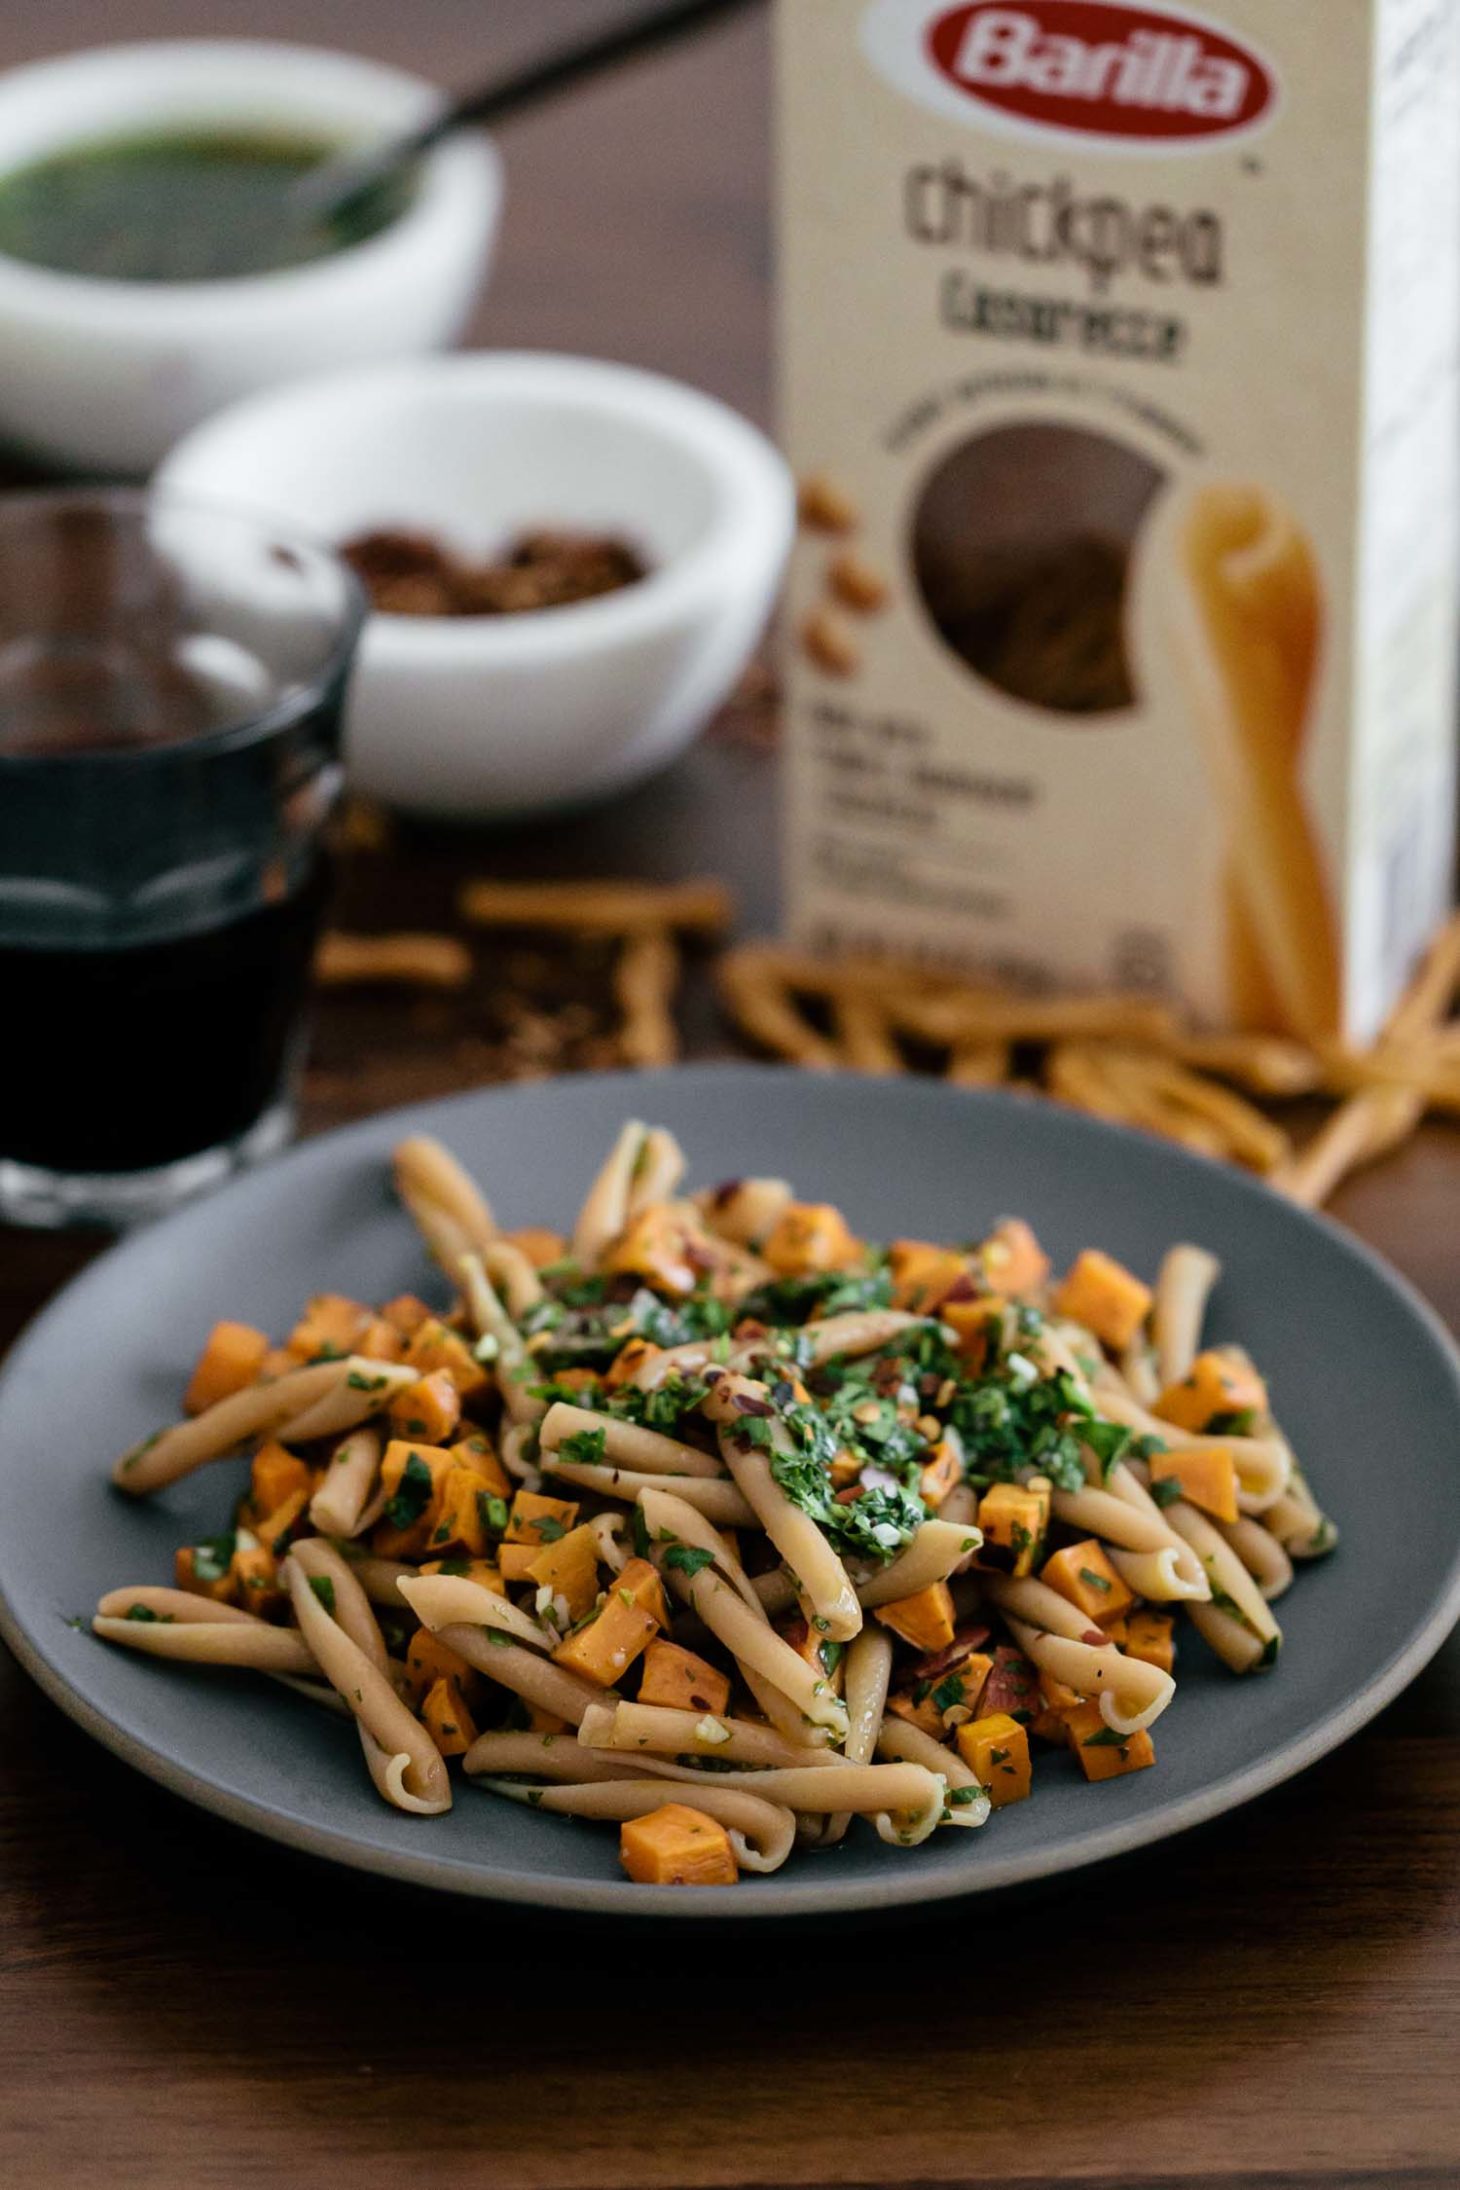 Chickpea Casarecce Pasta with Roasted Sweet Potatoes and Chimichurri